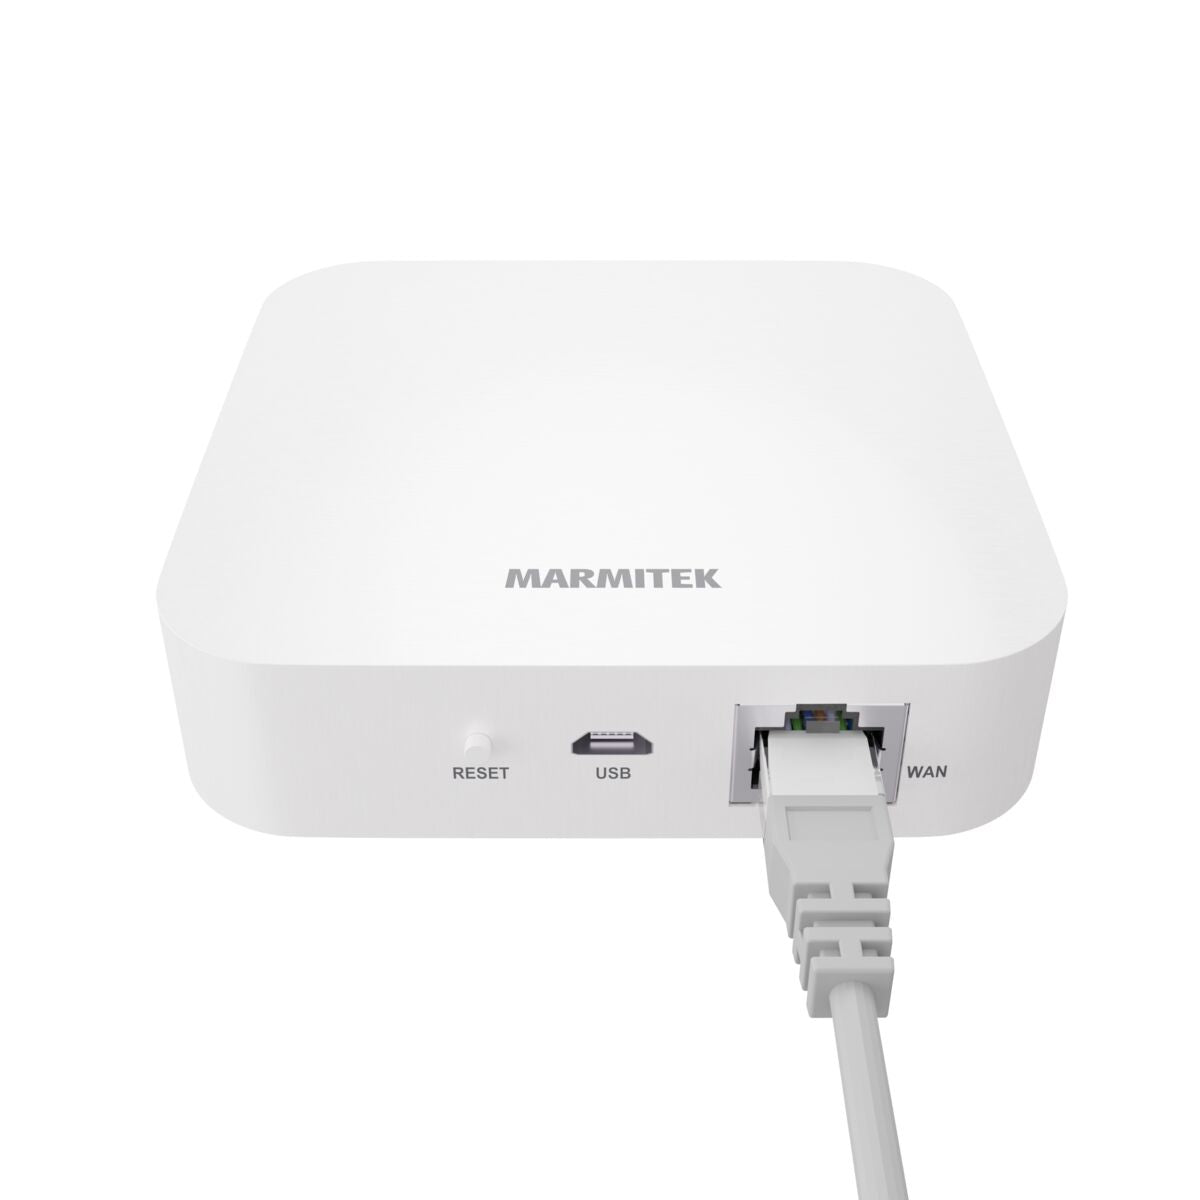 Link ME - Zigbee gateway - Connections with ethernet cable | Marmitek